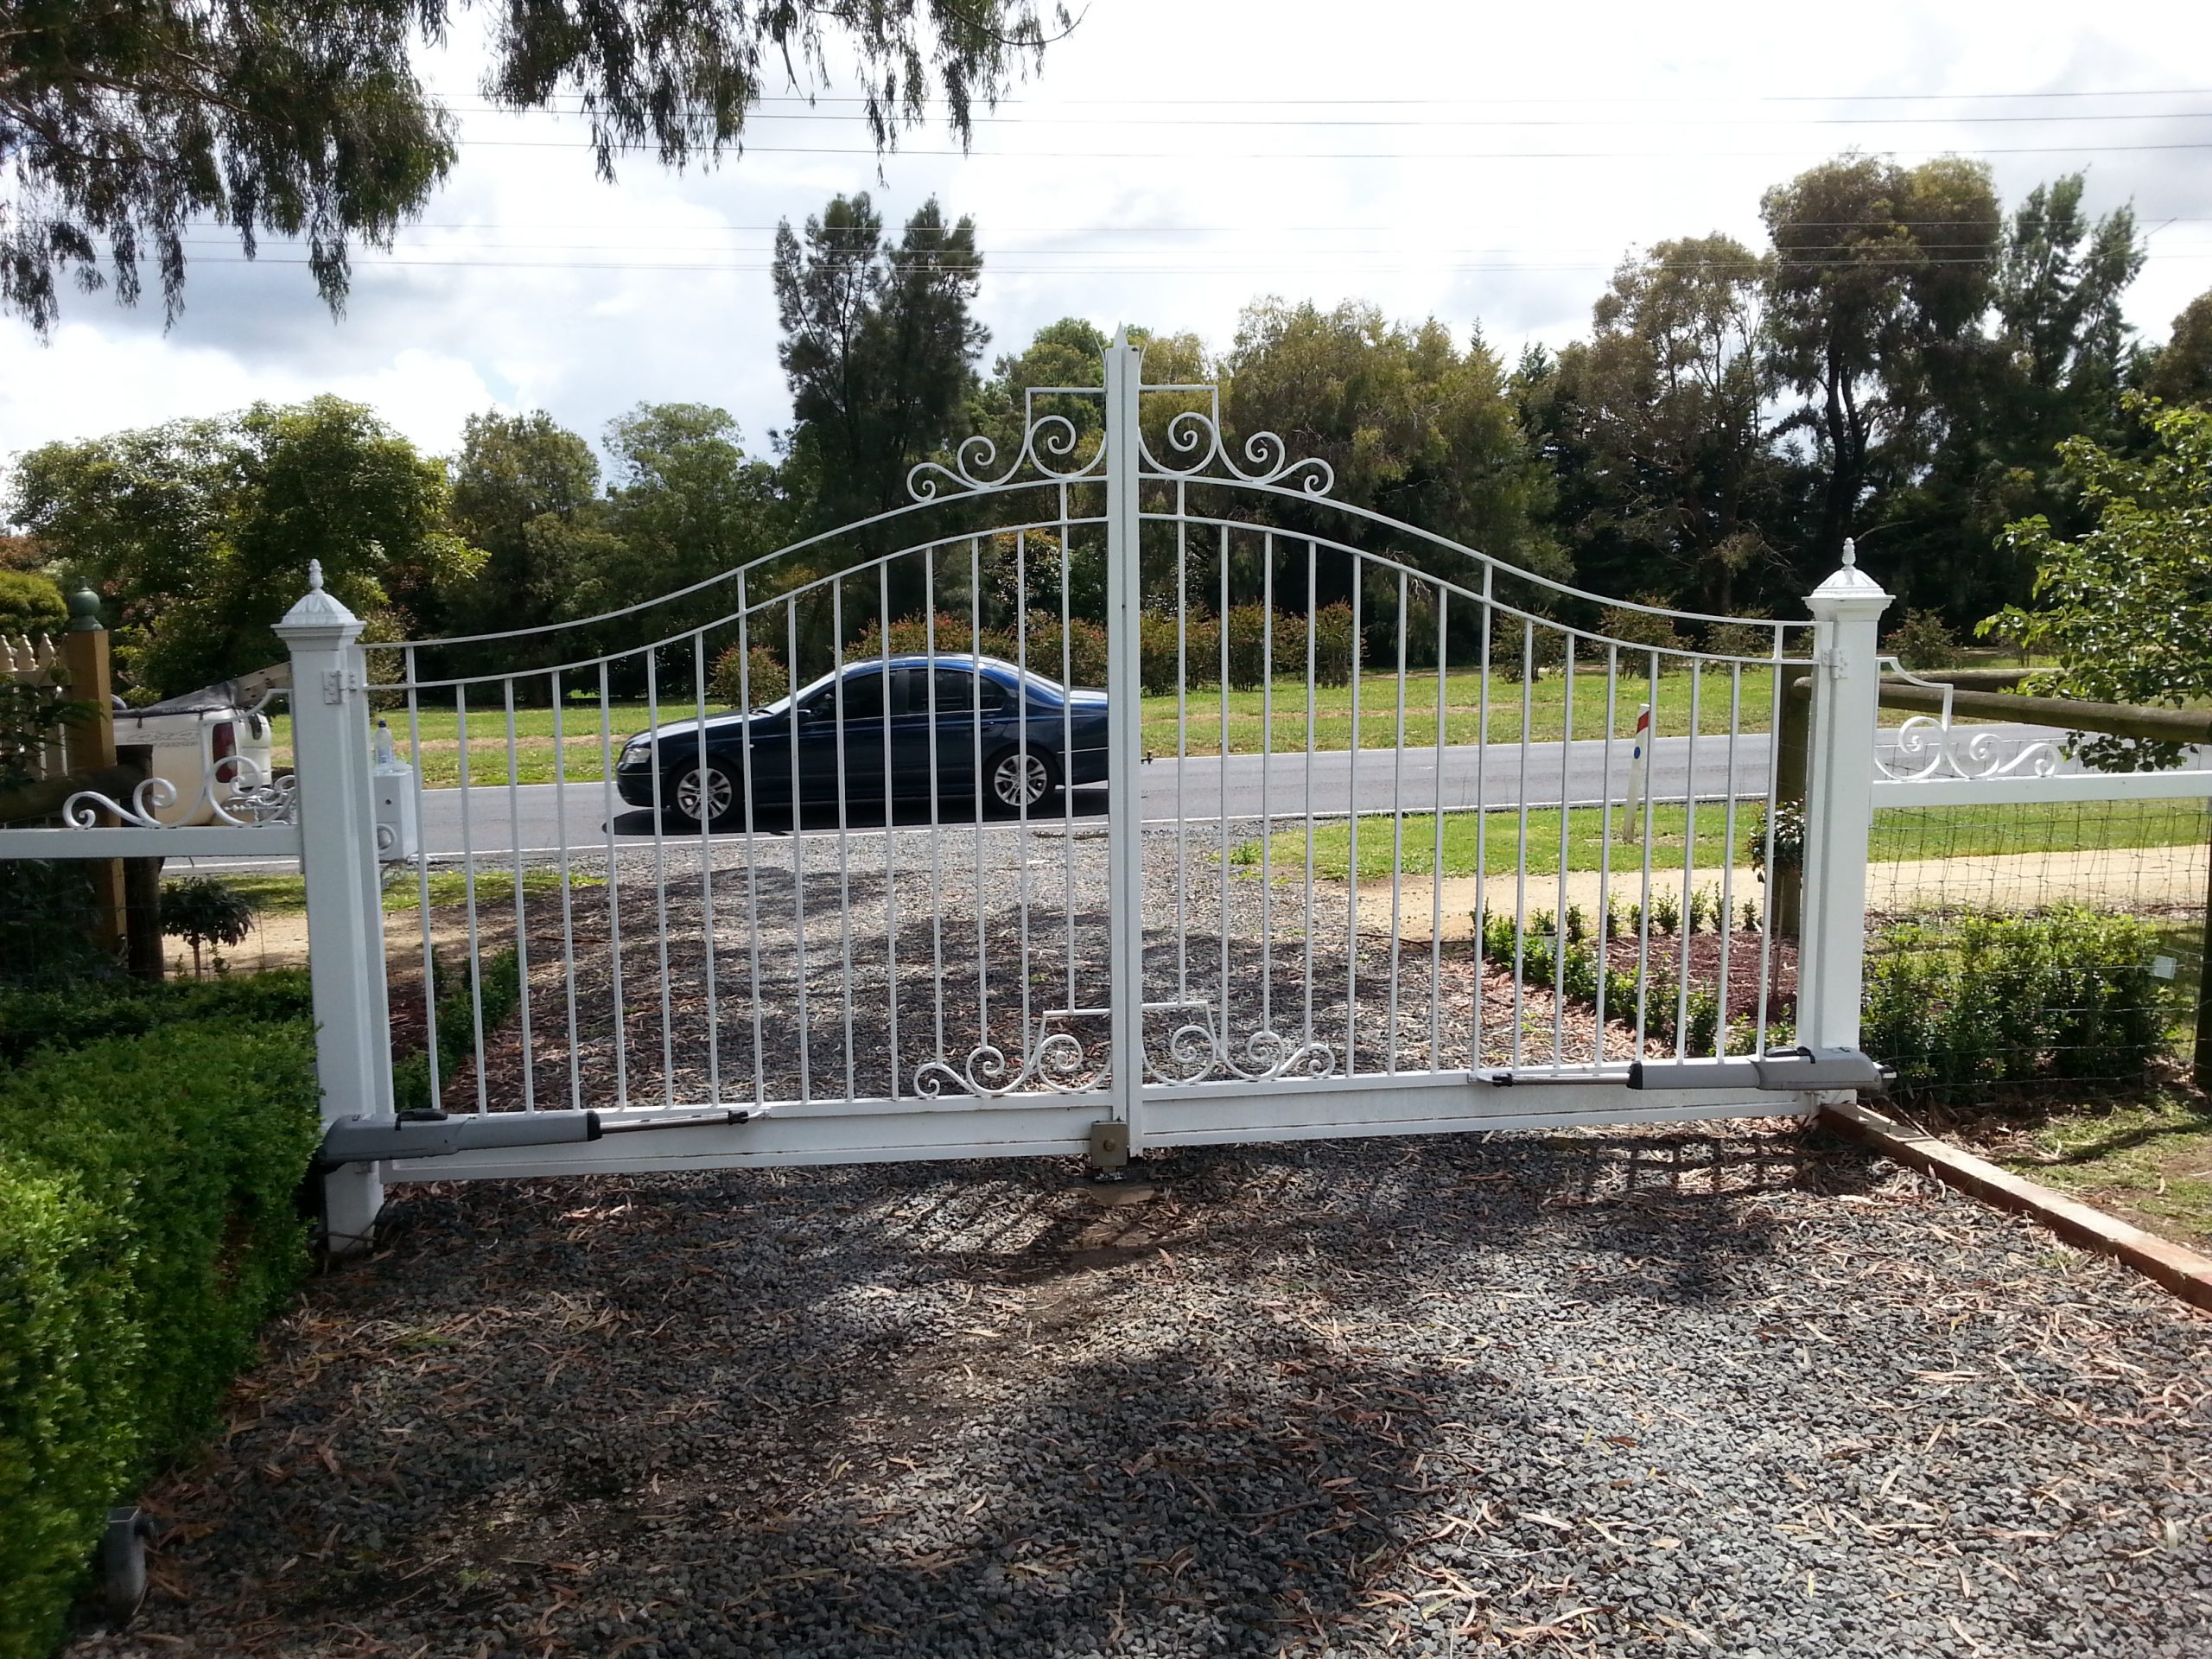 4 Ways an Automatic Gate Can Enhance the Privacy & Security of Your Property